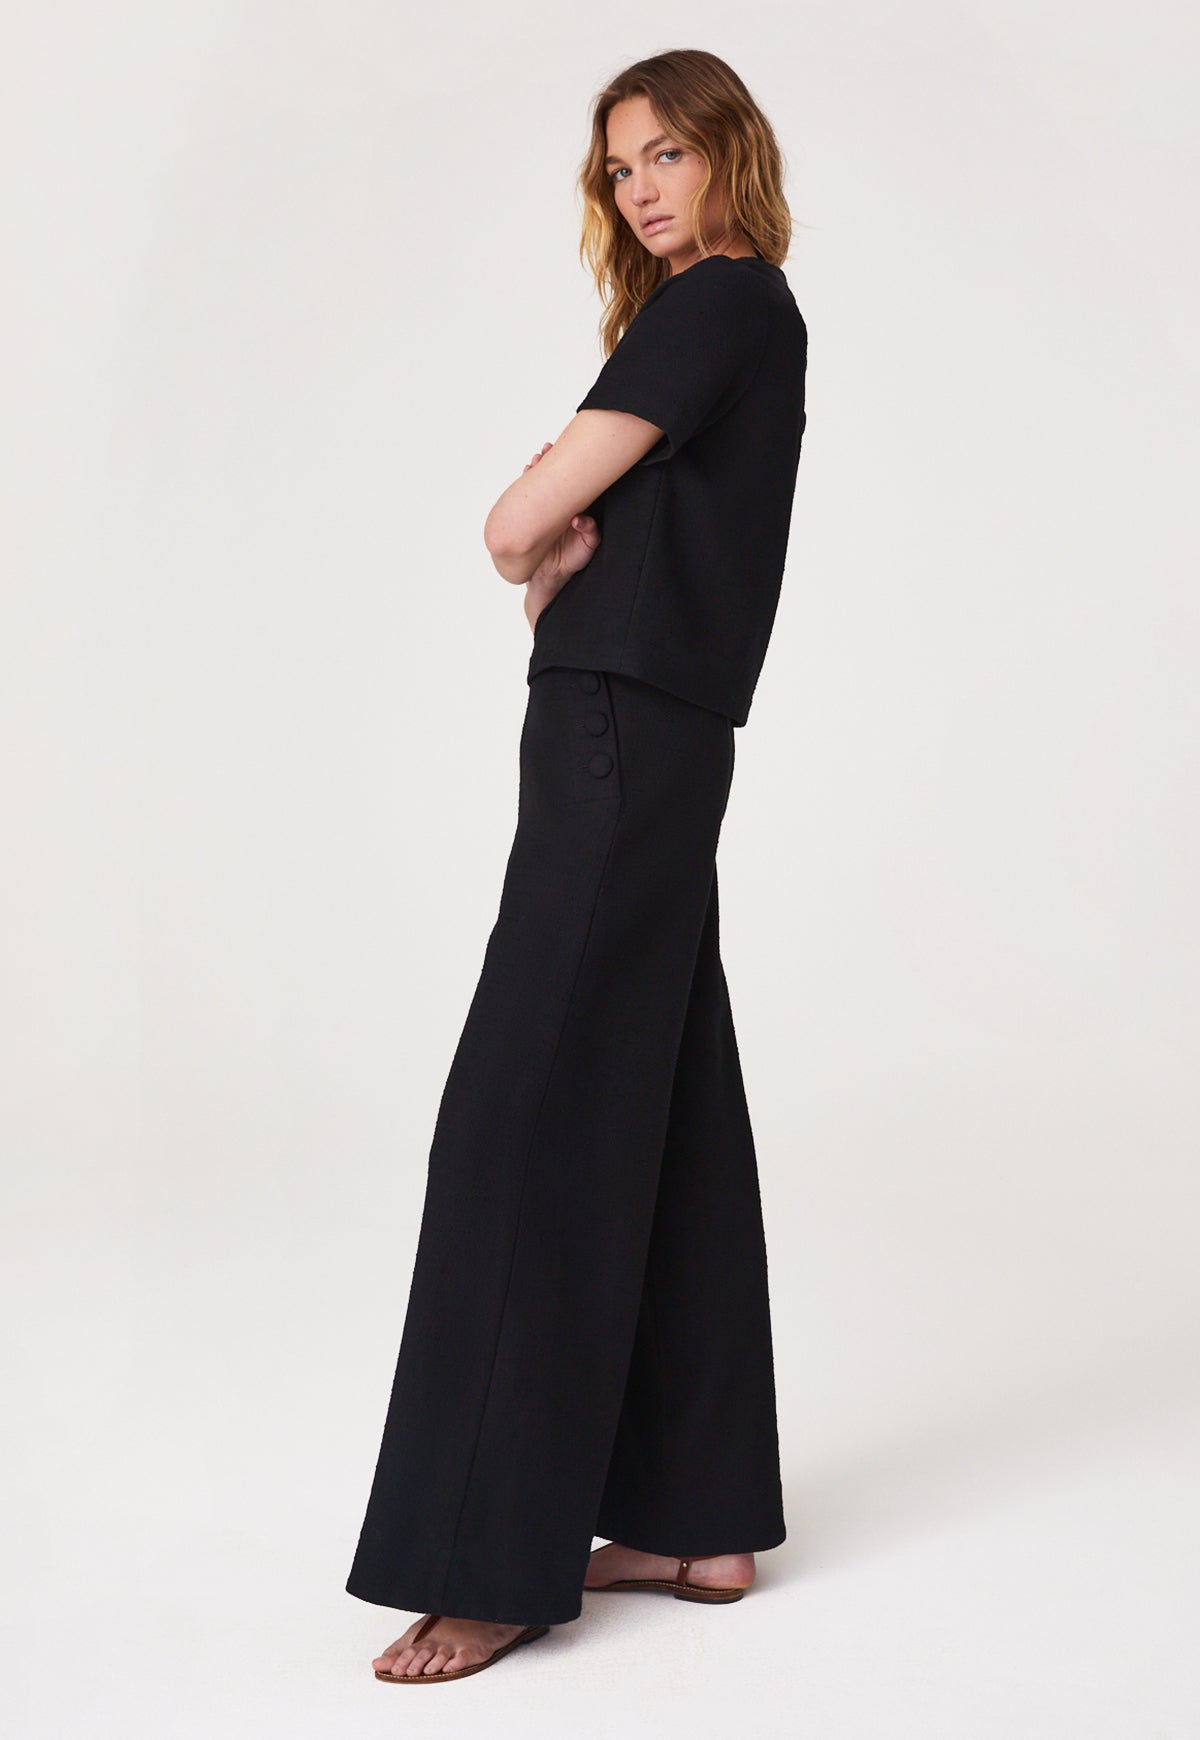 THE SAILOR PANT in BLACK TEXTURED COTTON